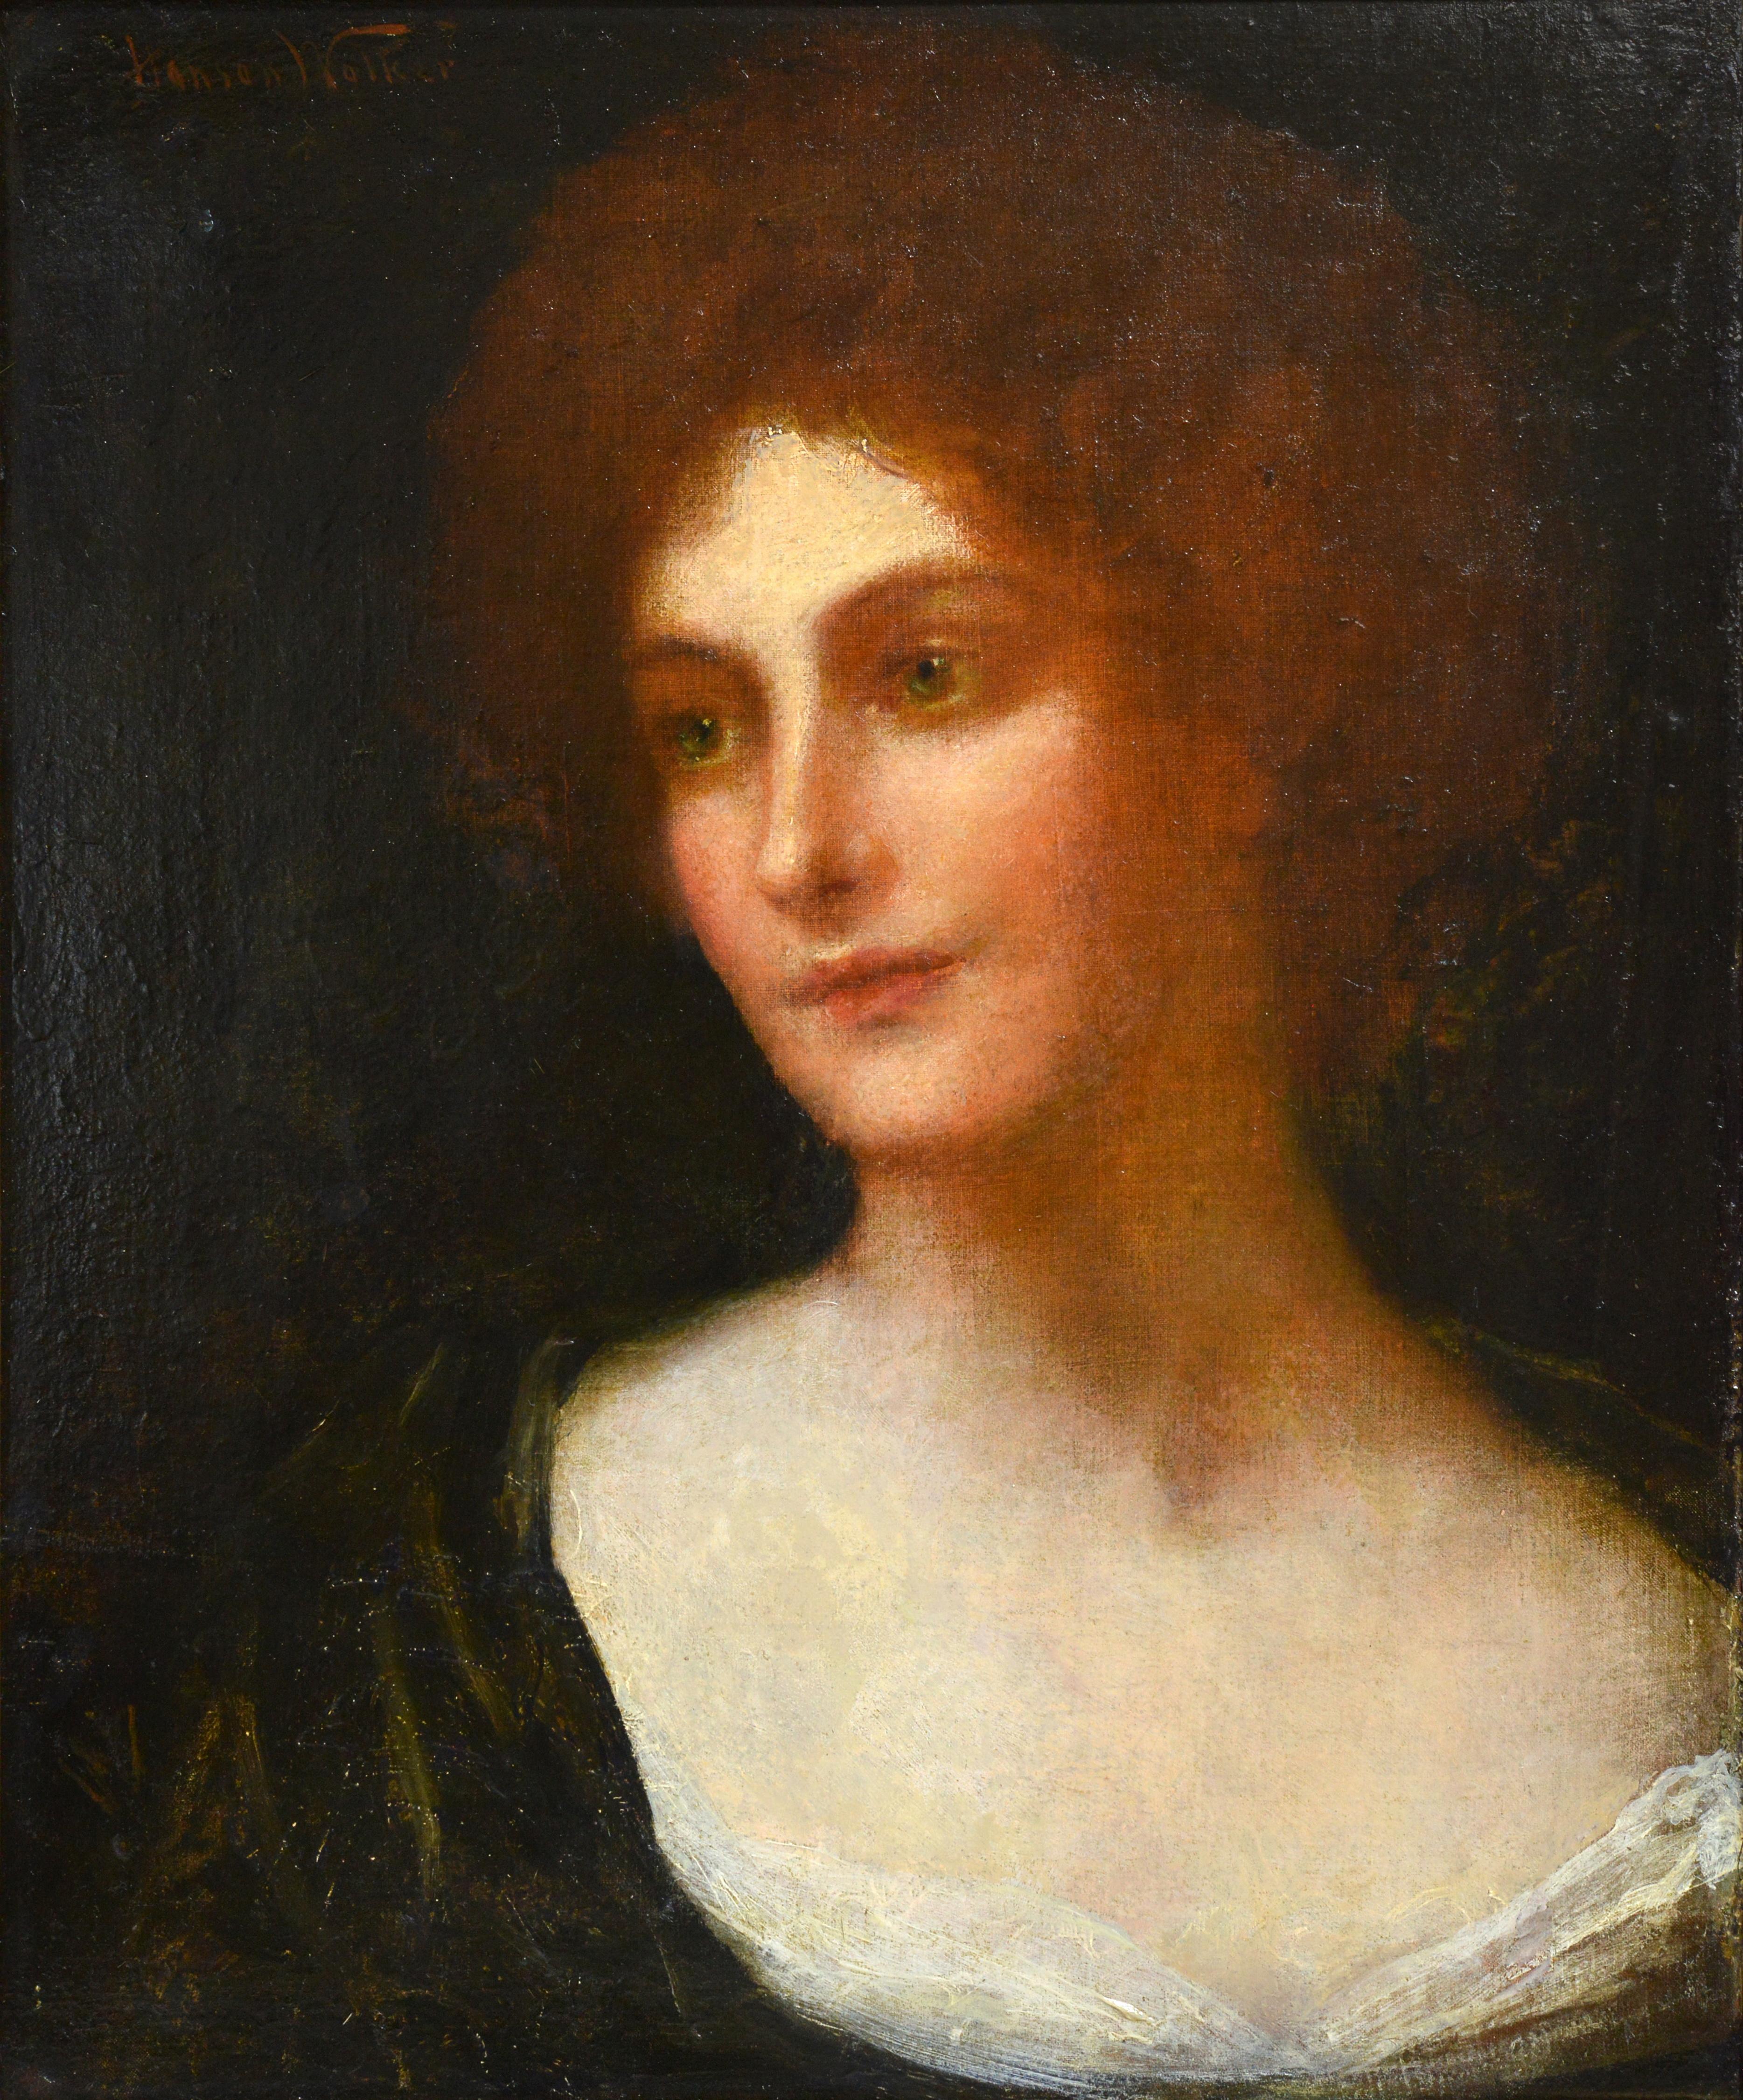 Portrait of Redhaired Lady with Emerald Eyes 19th century British Oil Painting - Brown Portrait Painting by John Hanson Walker